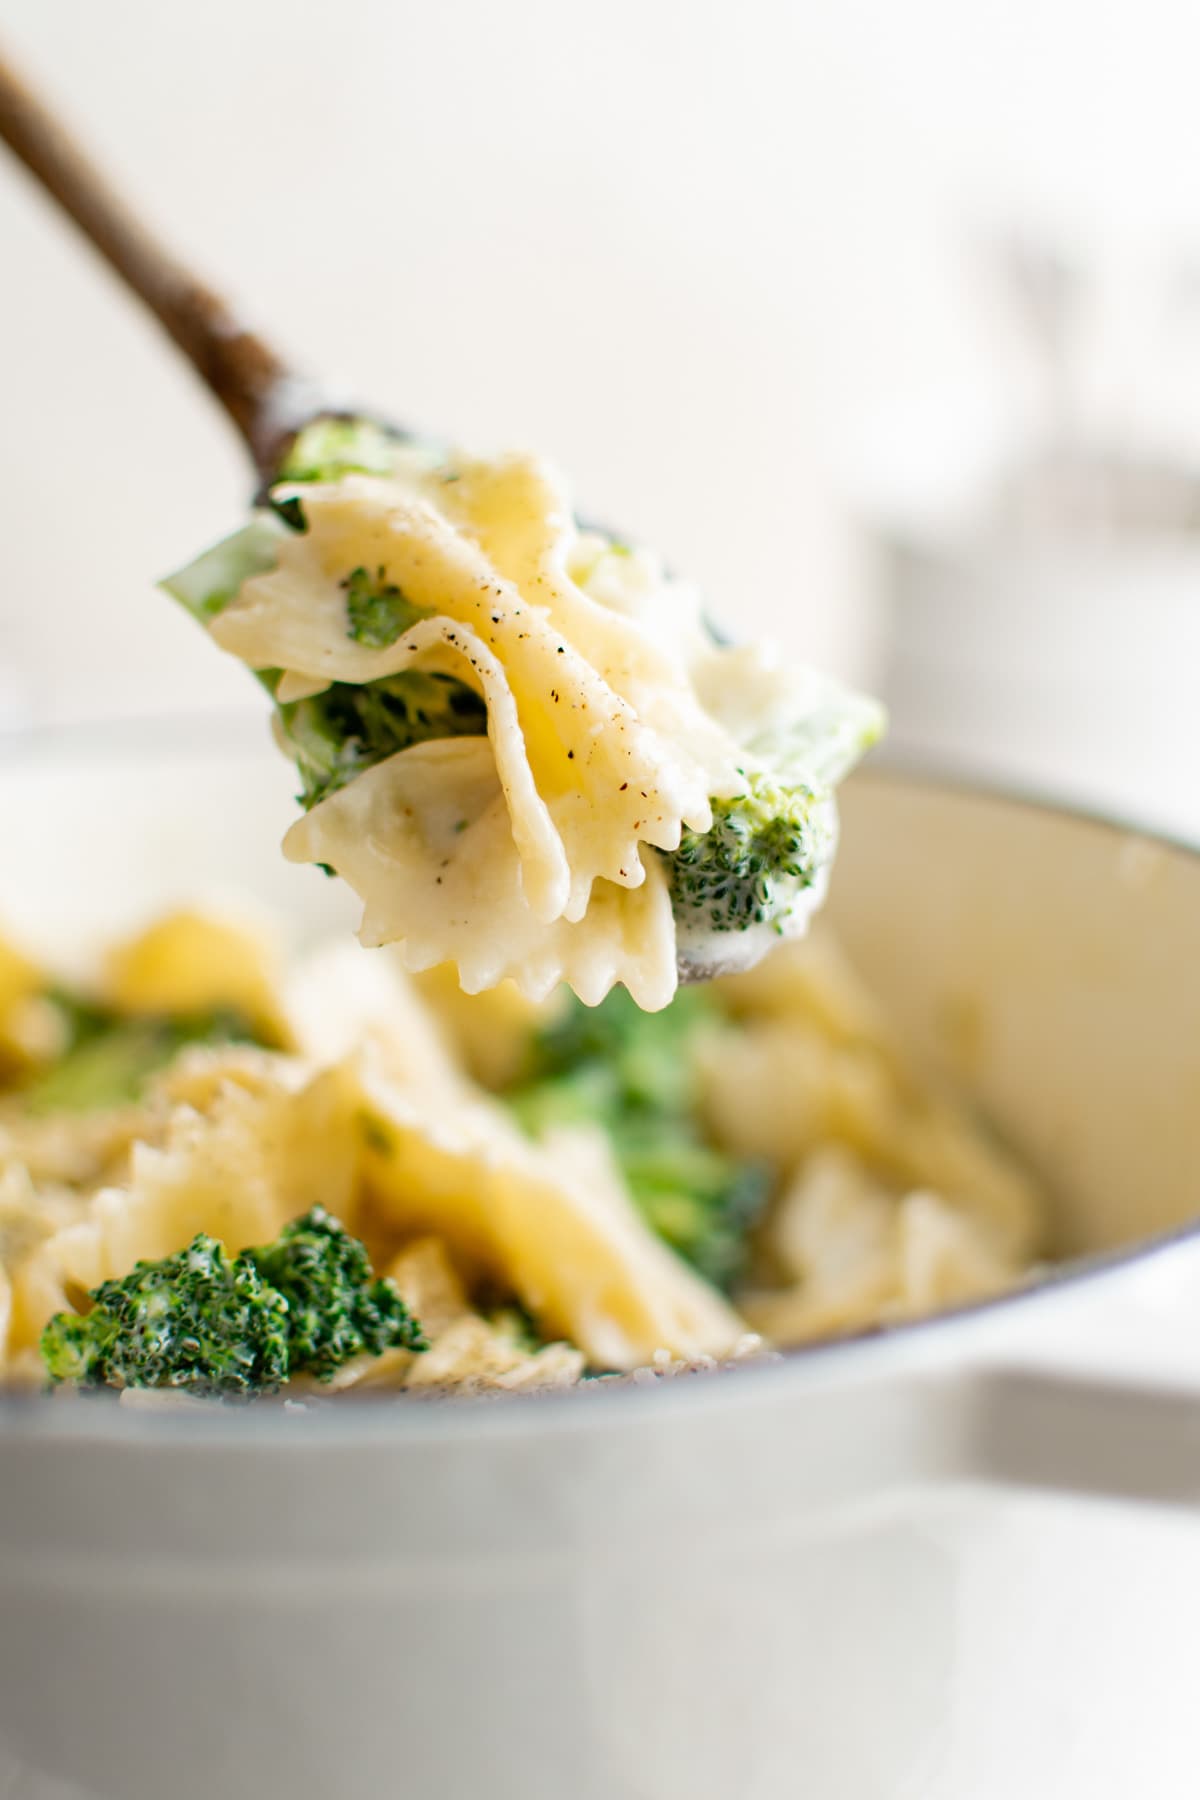 Pasta and broccoli serving on a wooden spoon.